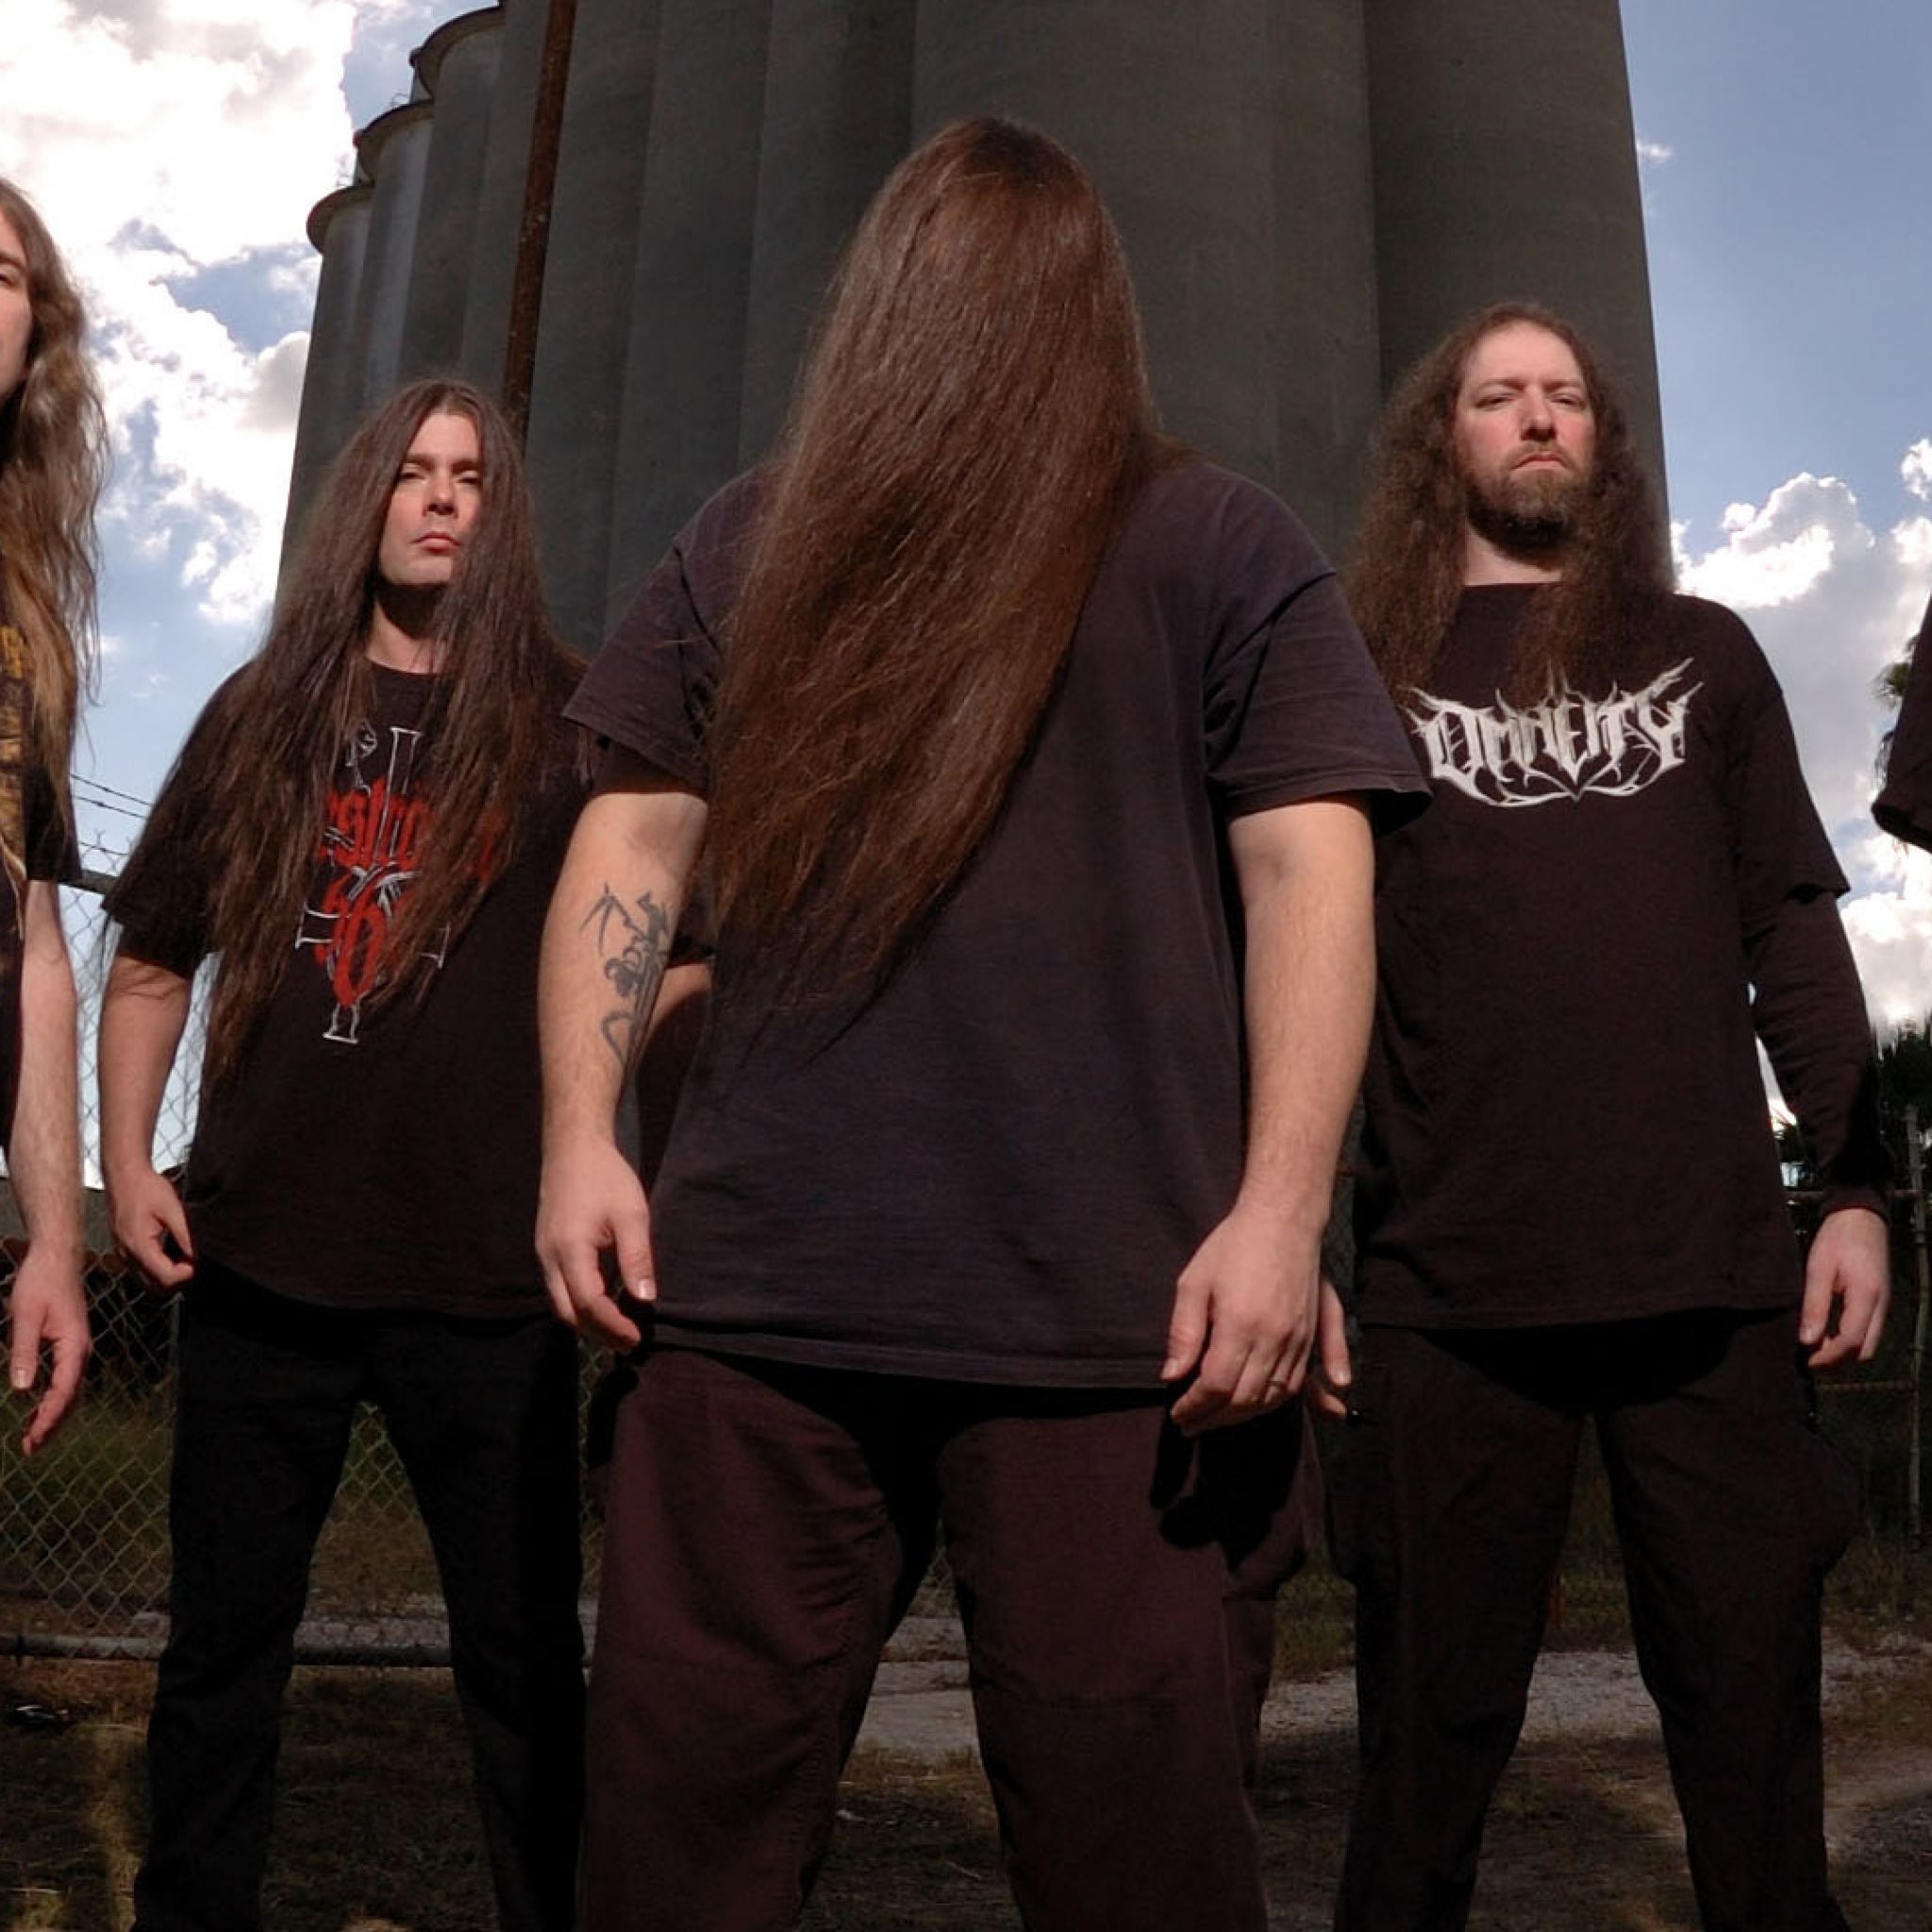 Download Wallpaper 2048x2048 Cannibal corpse, Hairs, Rockers, T ...